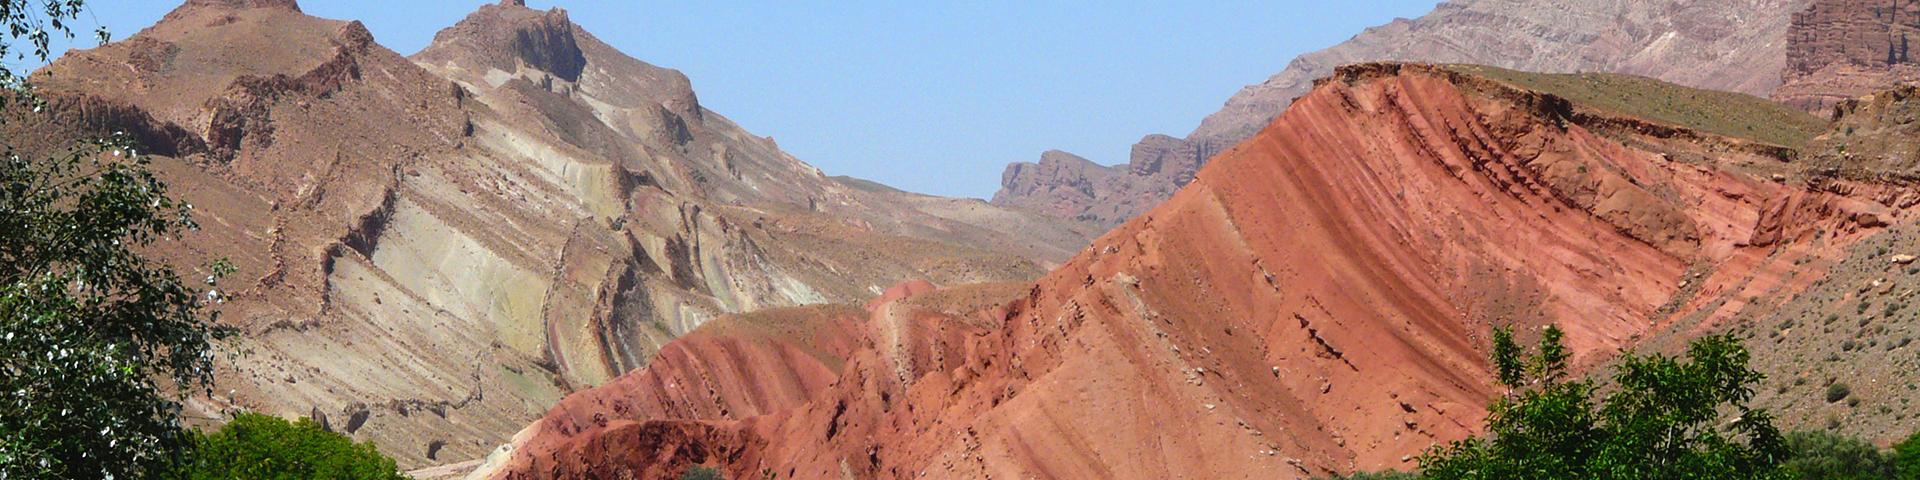 Deformation along the South-Atlas front, Morocco